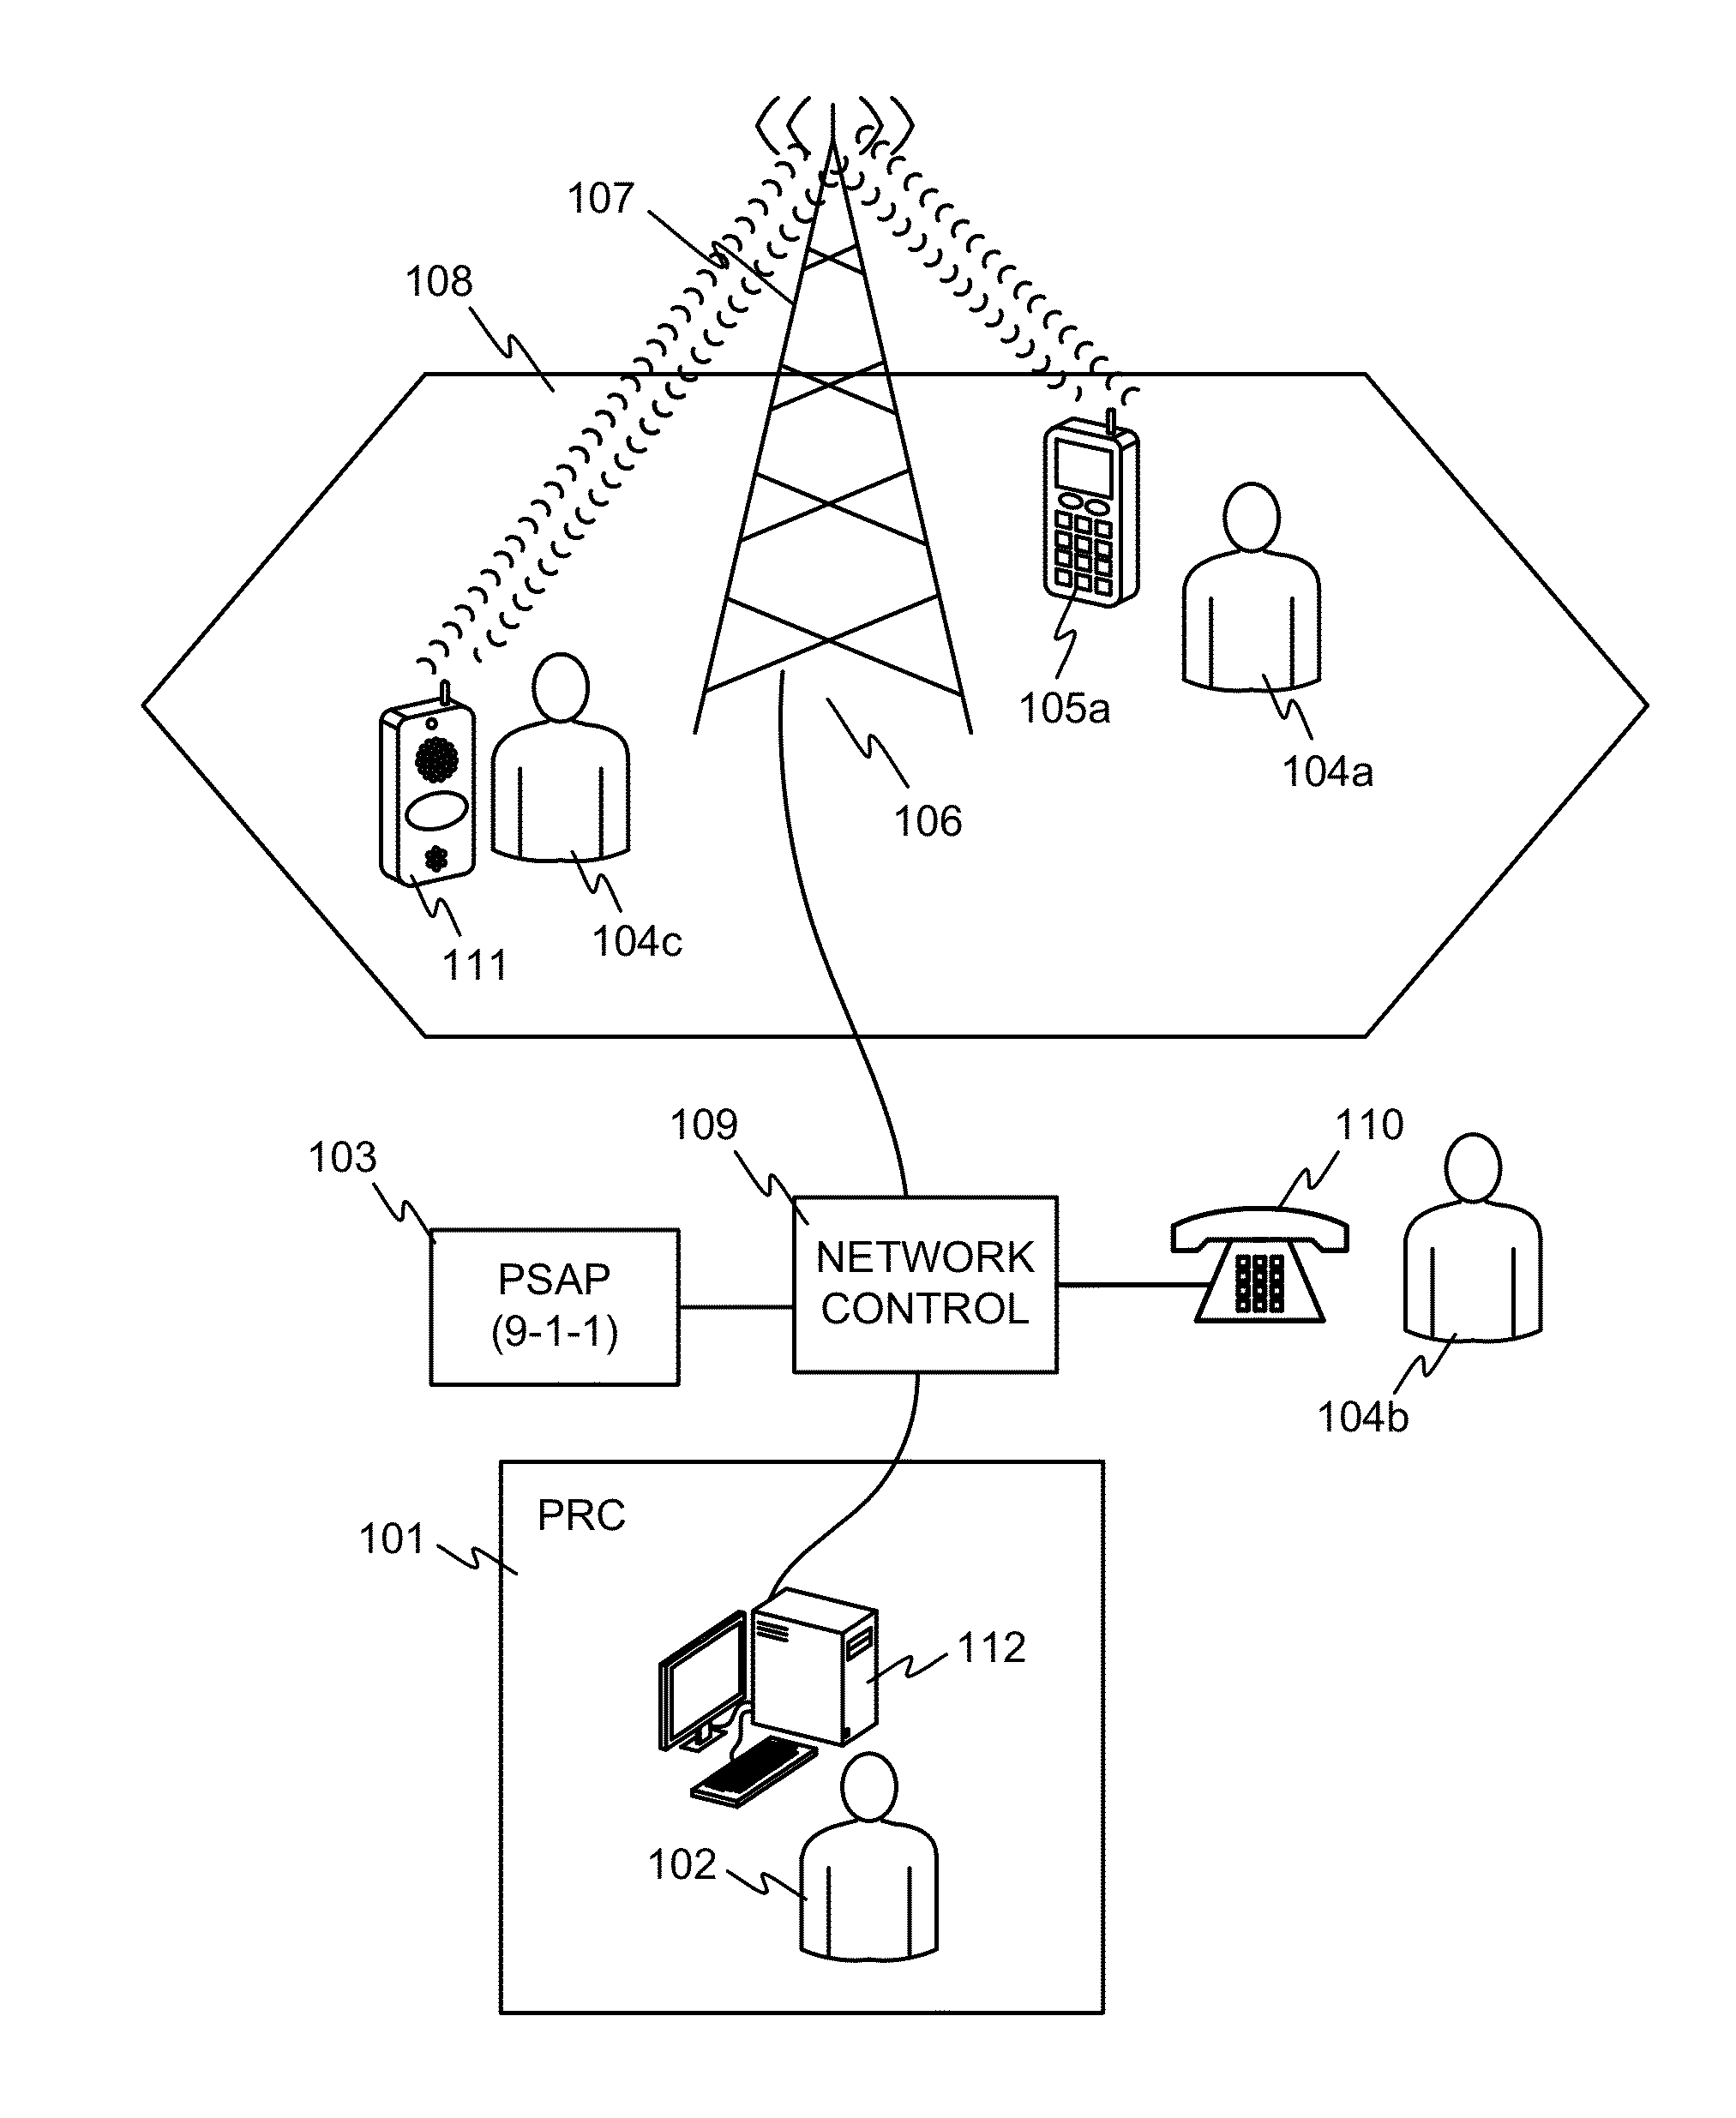 Method for engaging isolated individuals